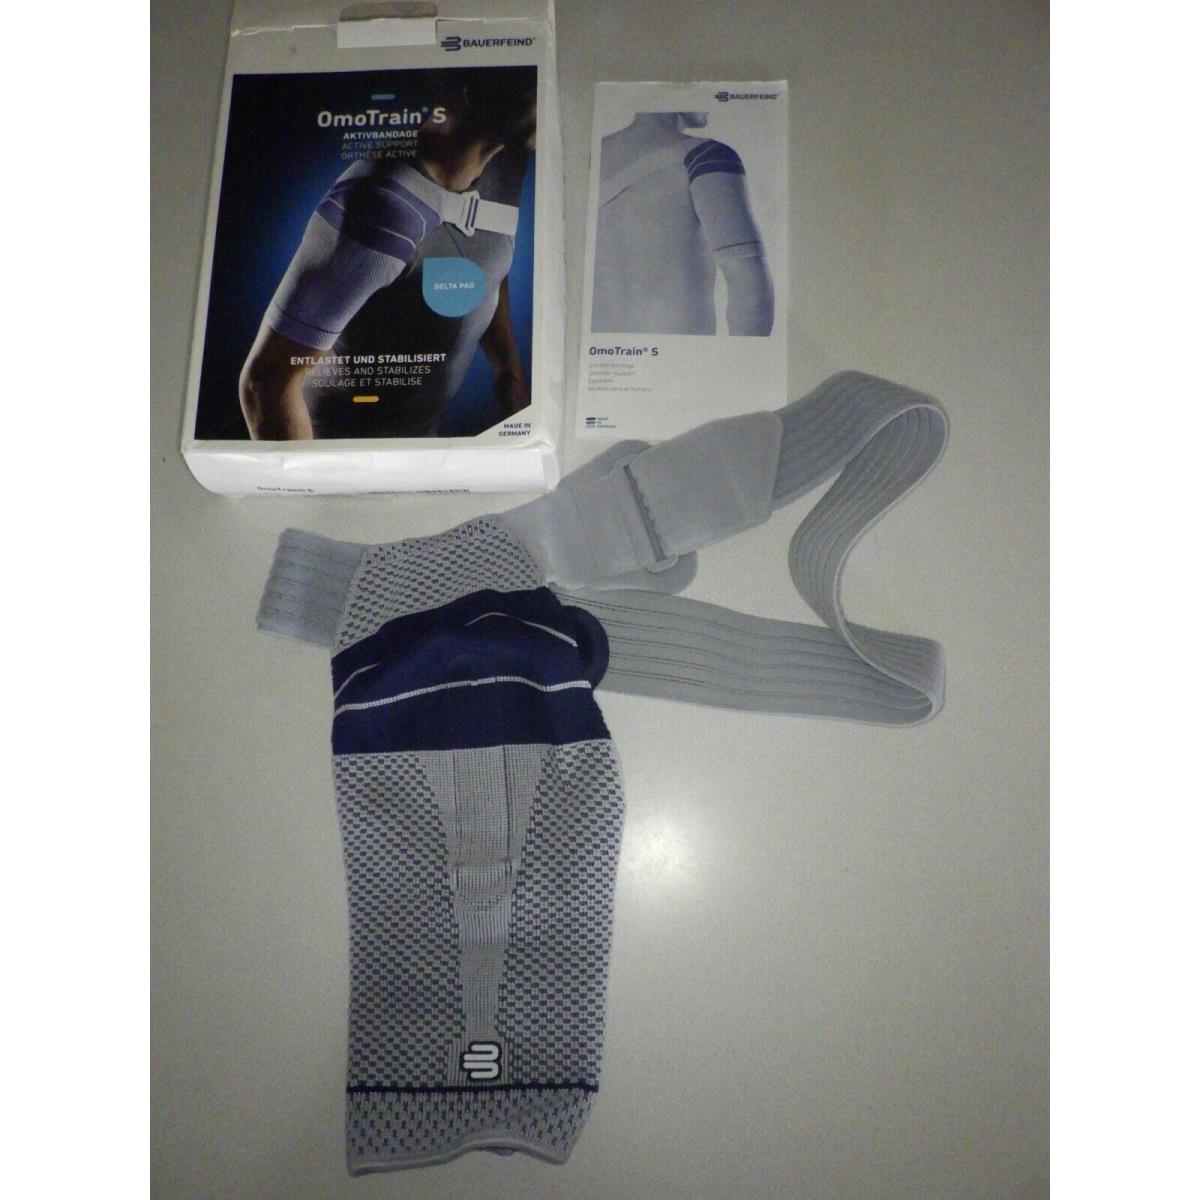 Bauerfeind Omotrain S Shoulder Support Helps Provide Support Right Size 1